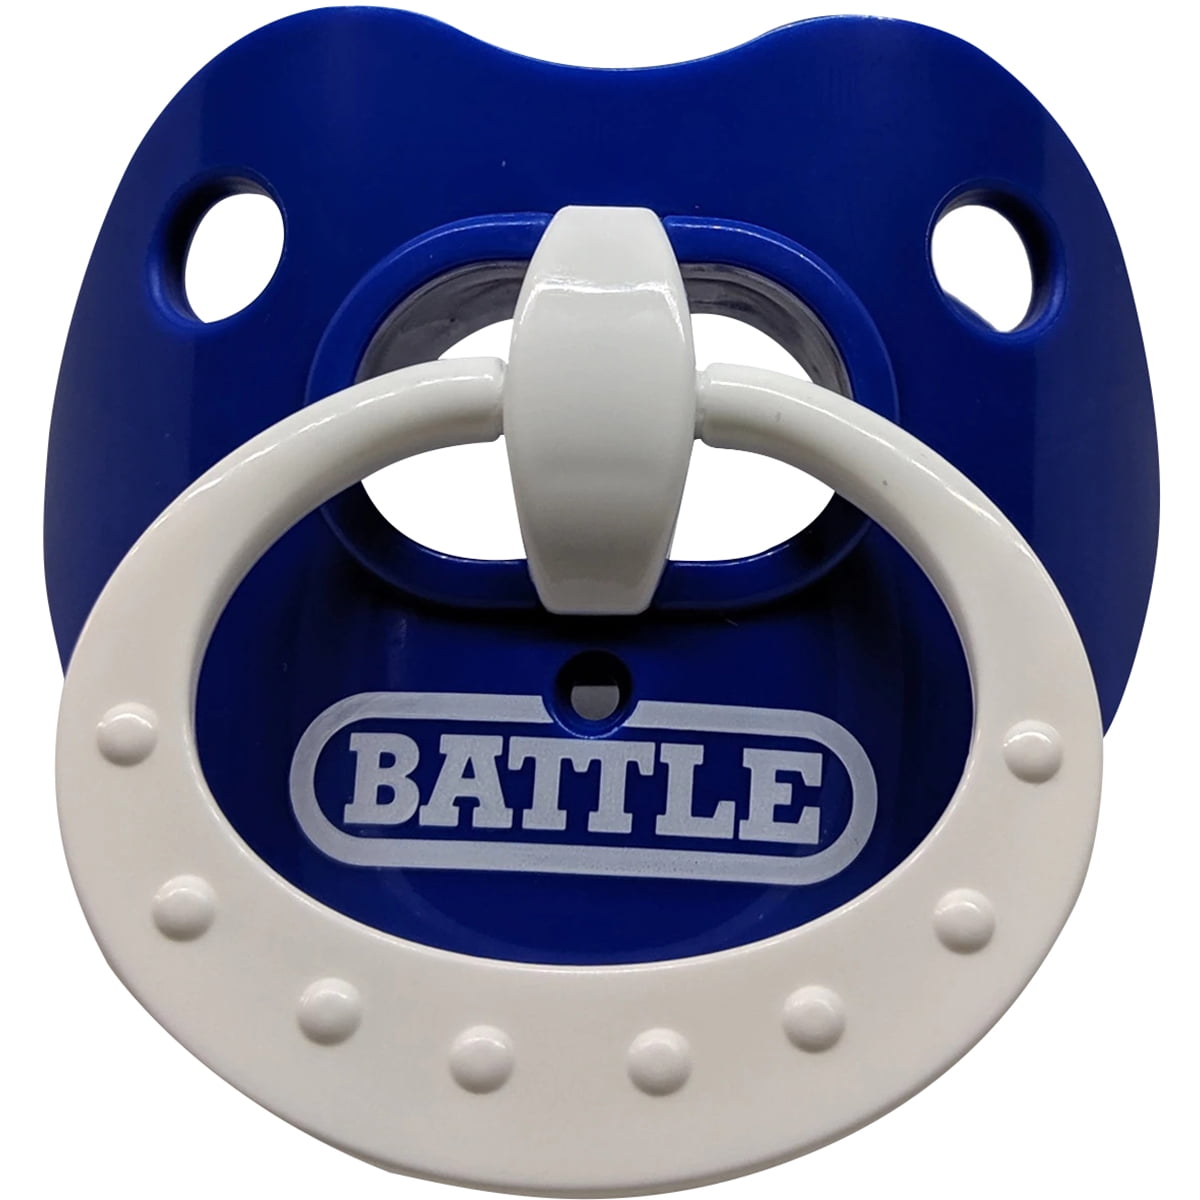 Battle Binky Football Mouthguard Mouthpiece Adult One Size Fits Most 